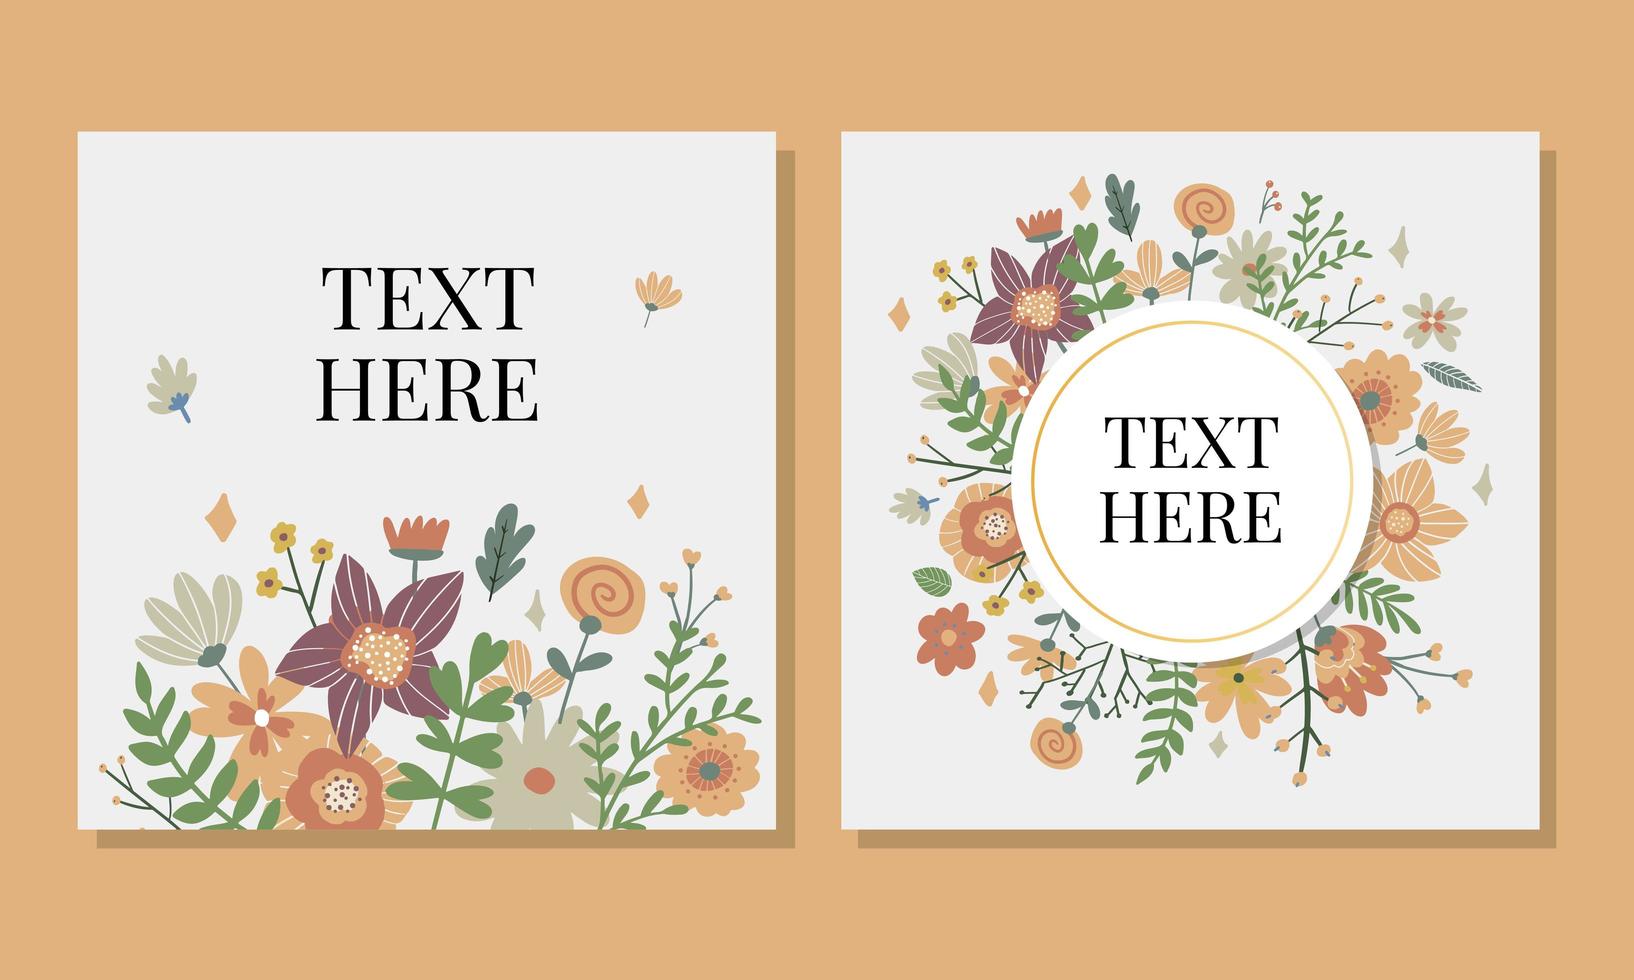 Floral Frame Collection. Set of cute retro flowers vector